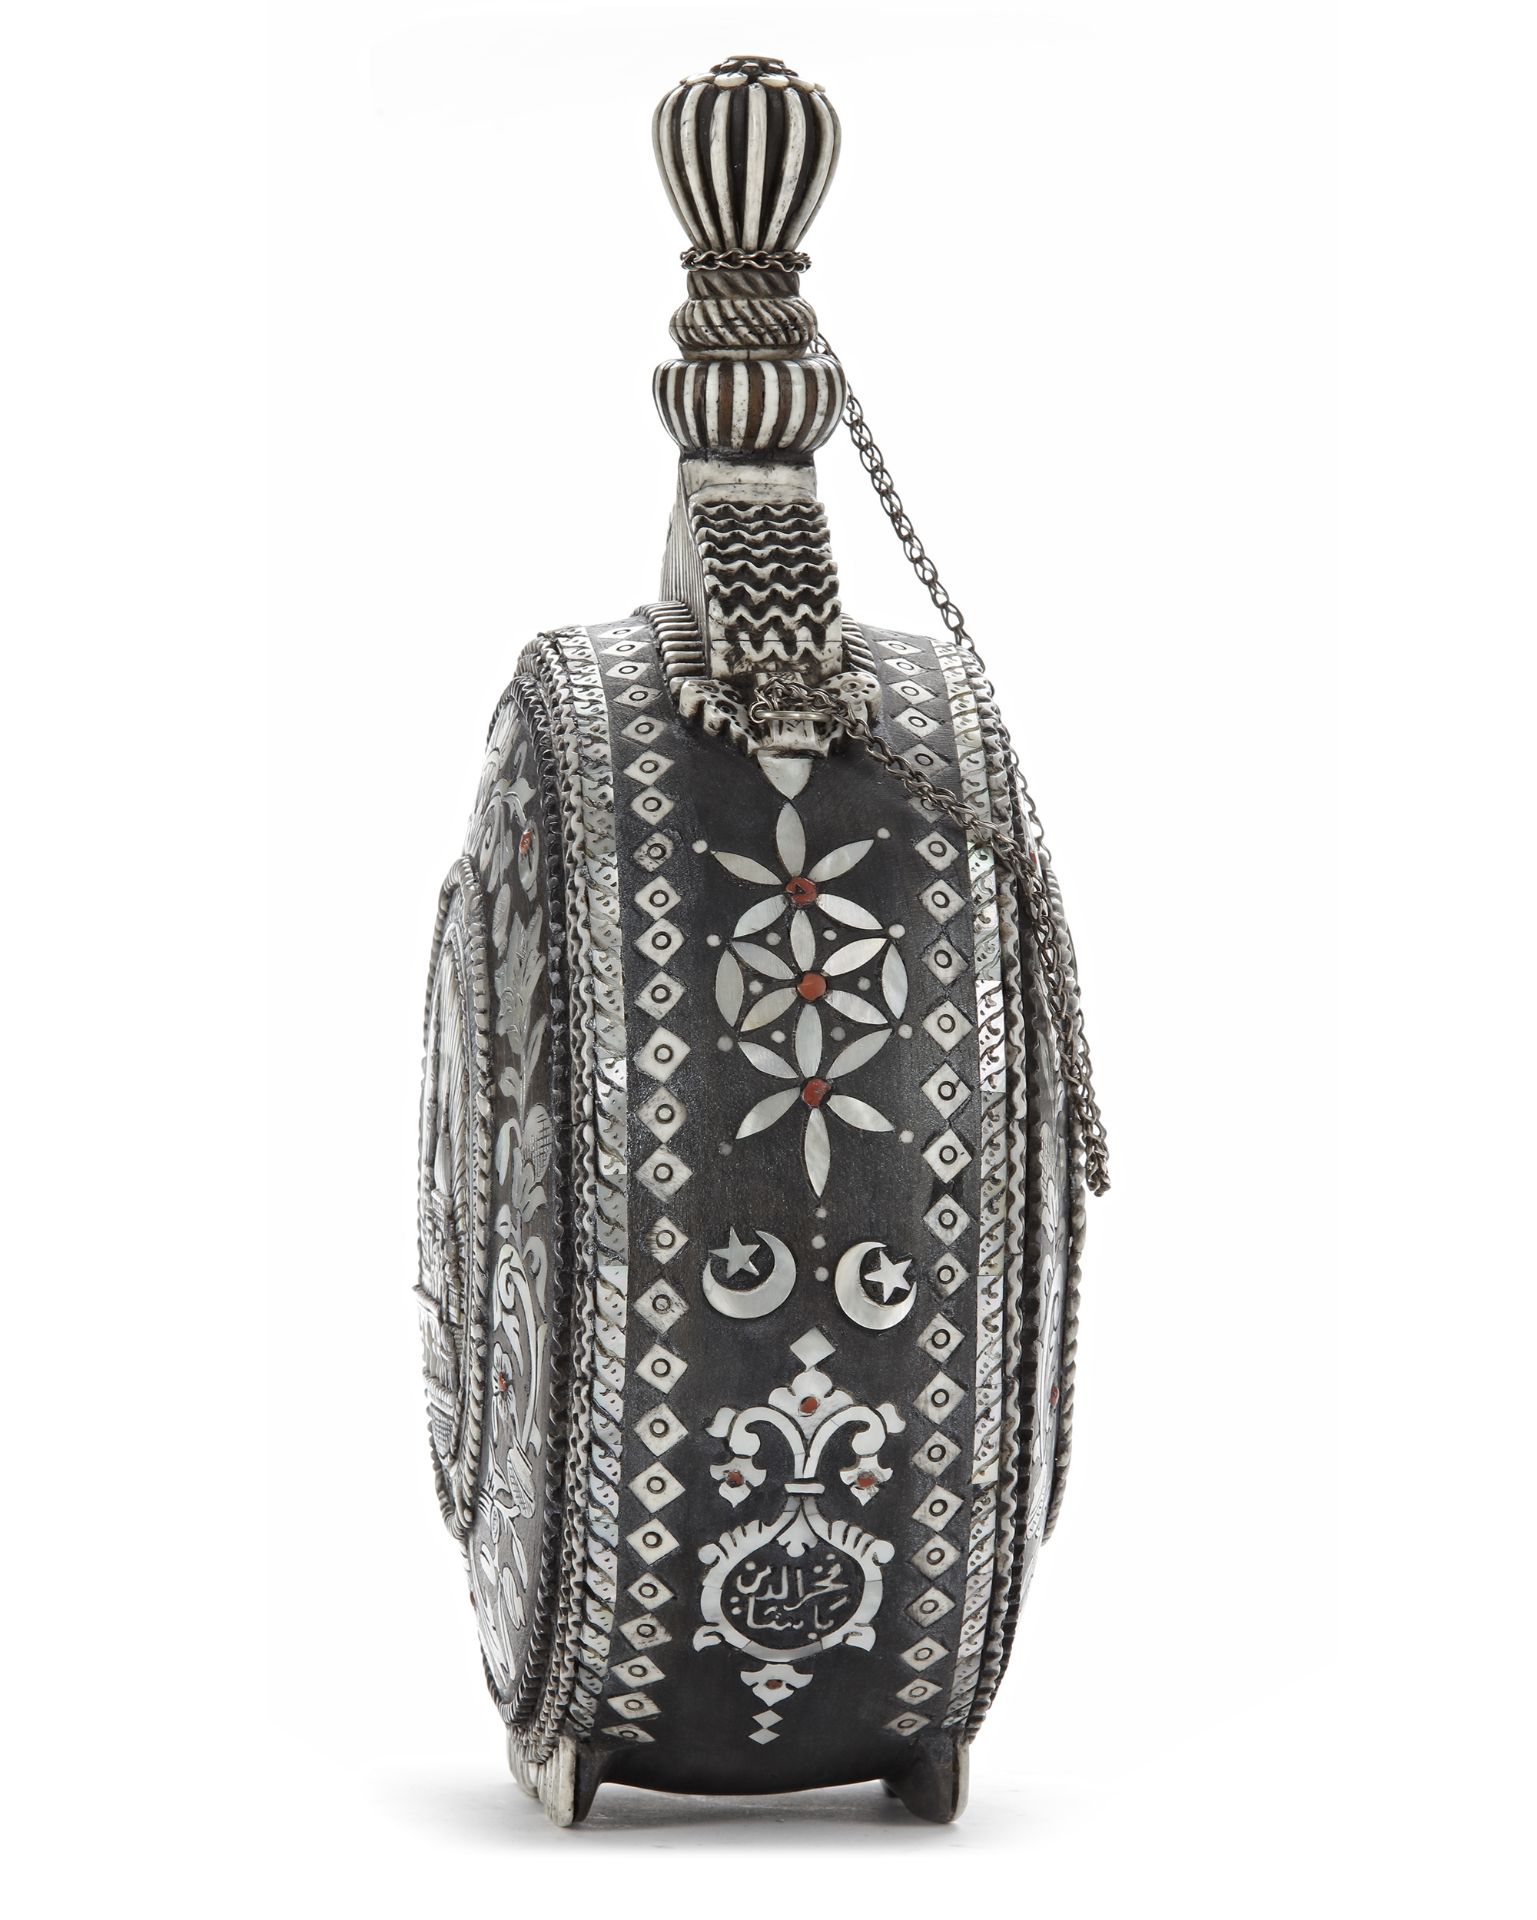 AN OTTOMAN MOTHER-OF-PEARL WOODEN MOON FLASK, EARLY 20TH CENTURY - Image 4 of 4